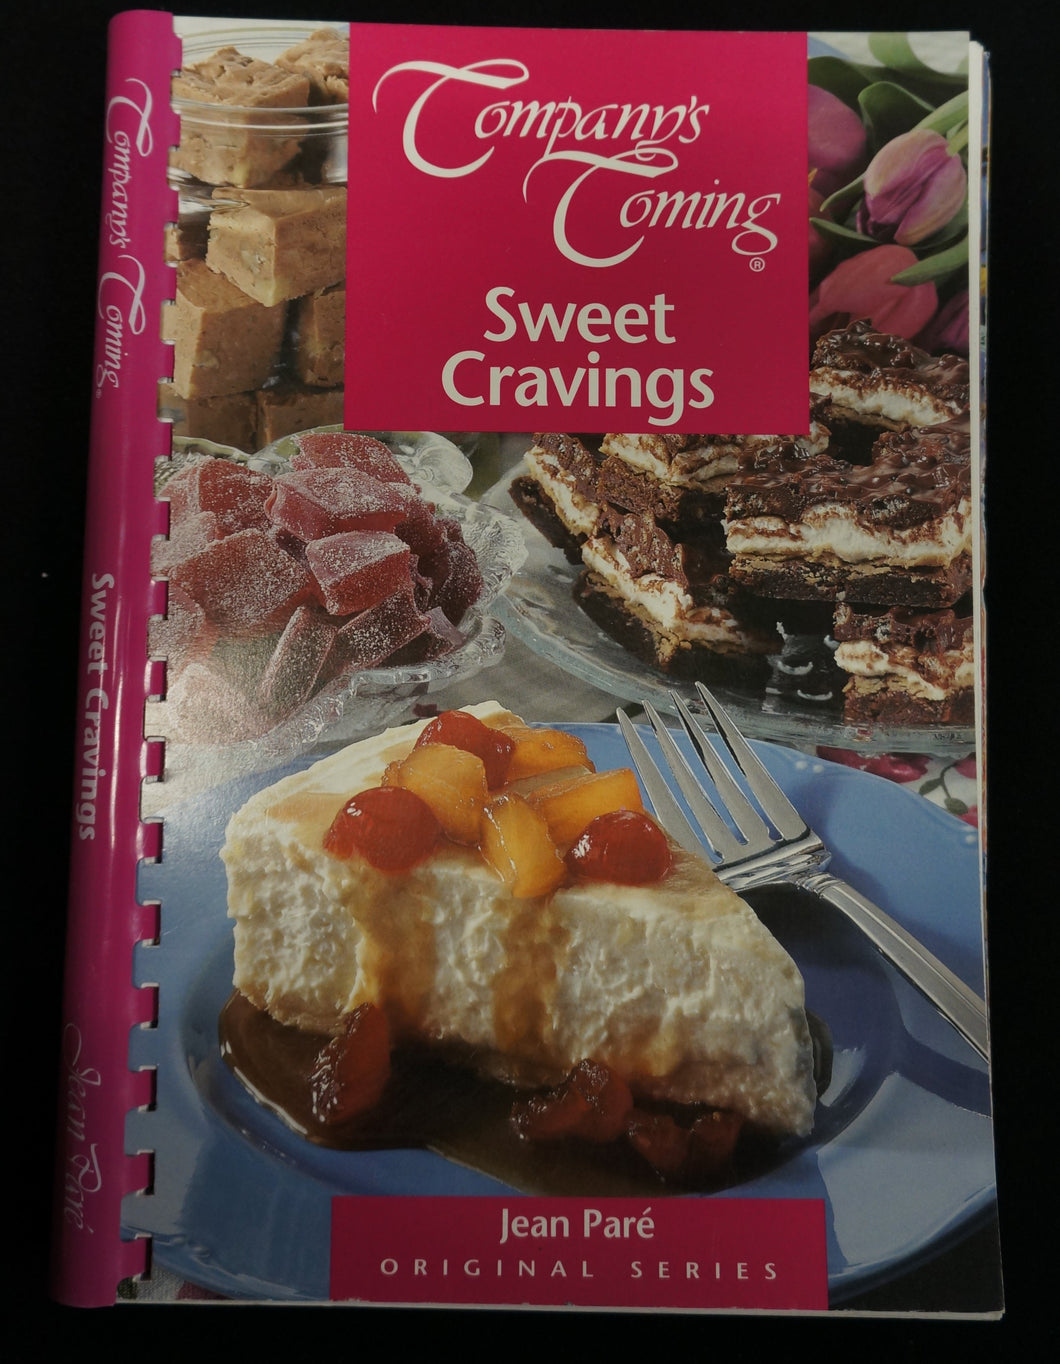 Company's Coming - Sweet Cravings